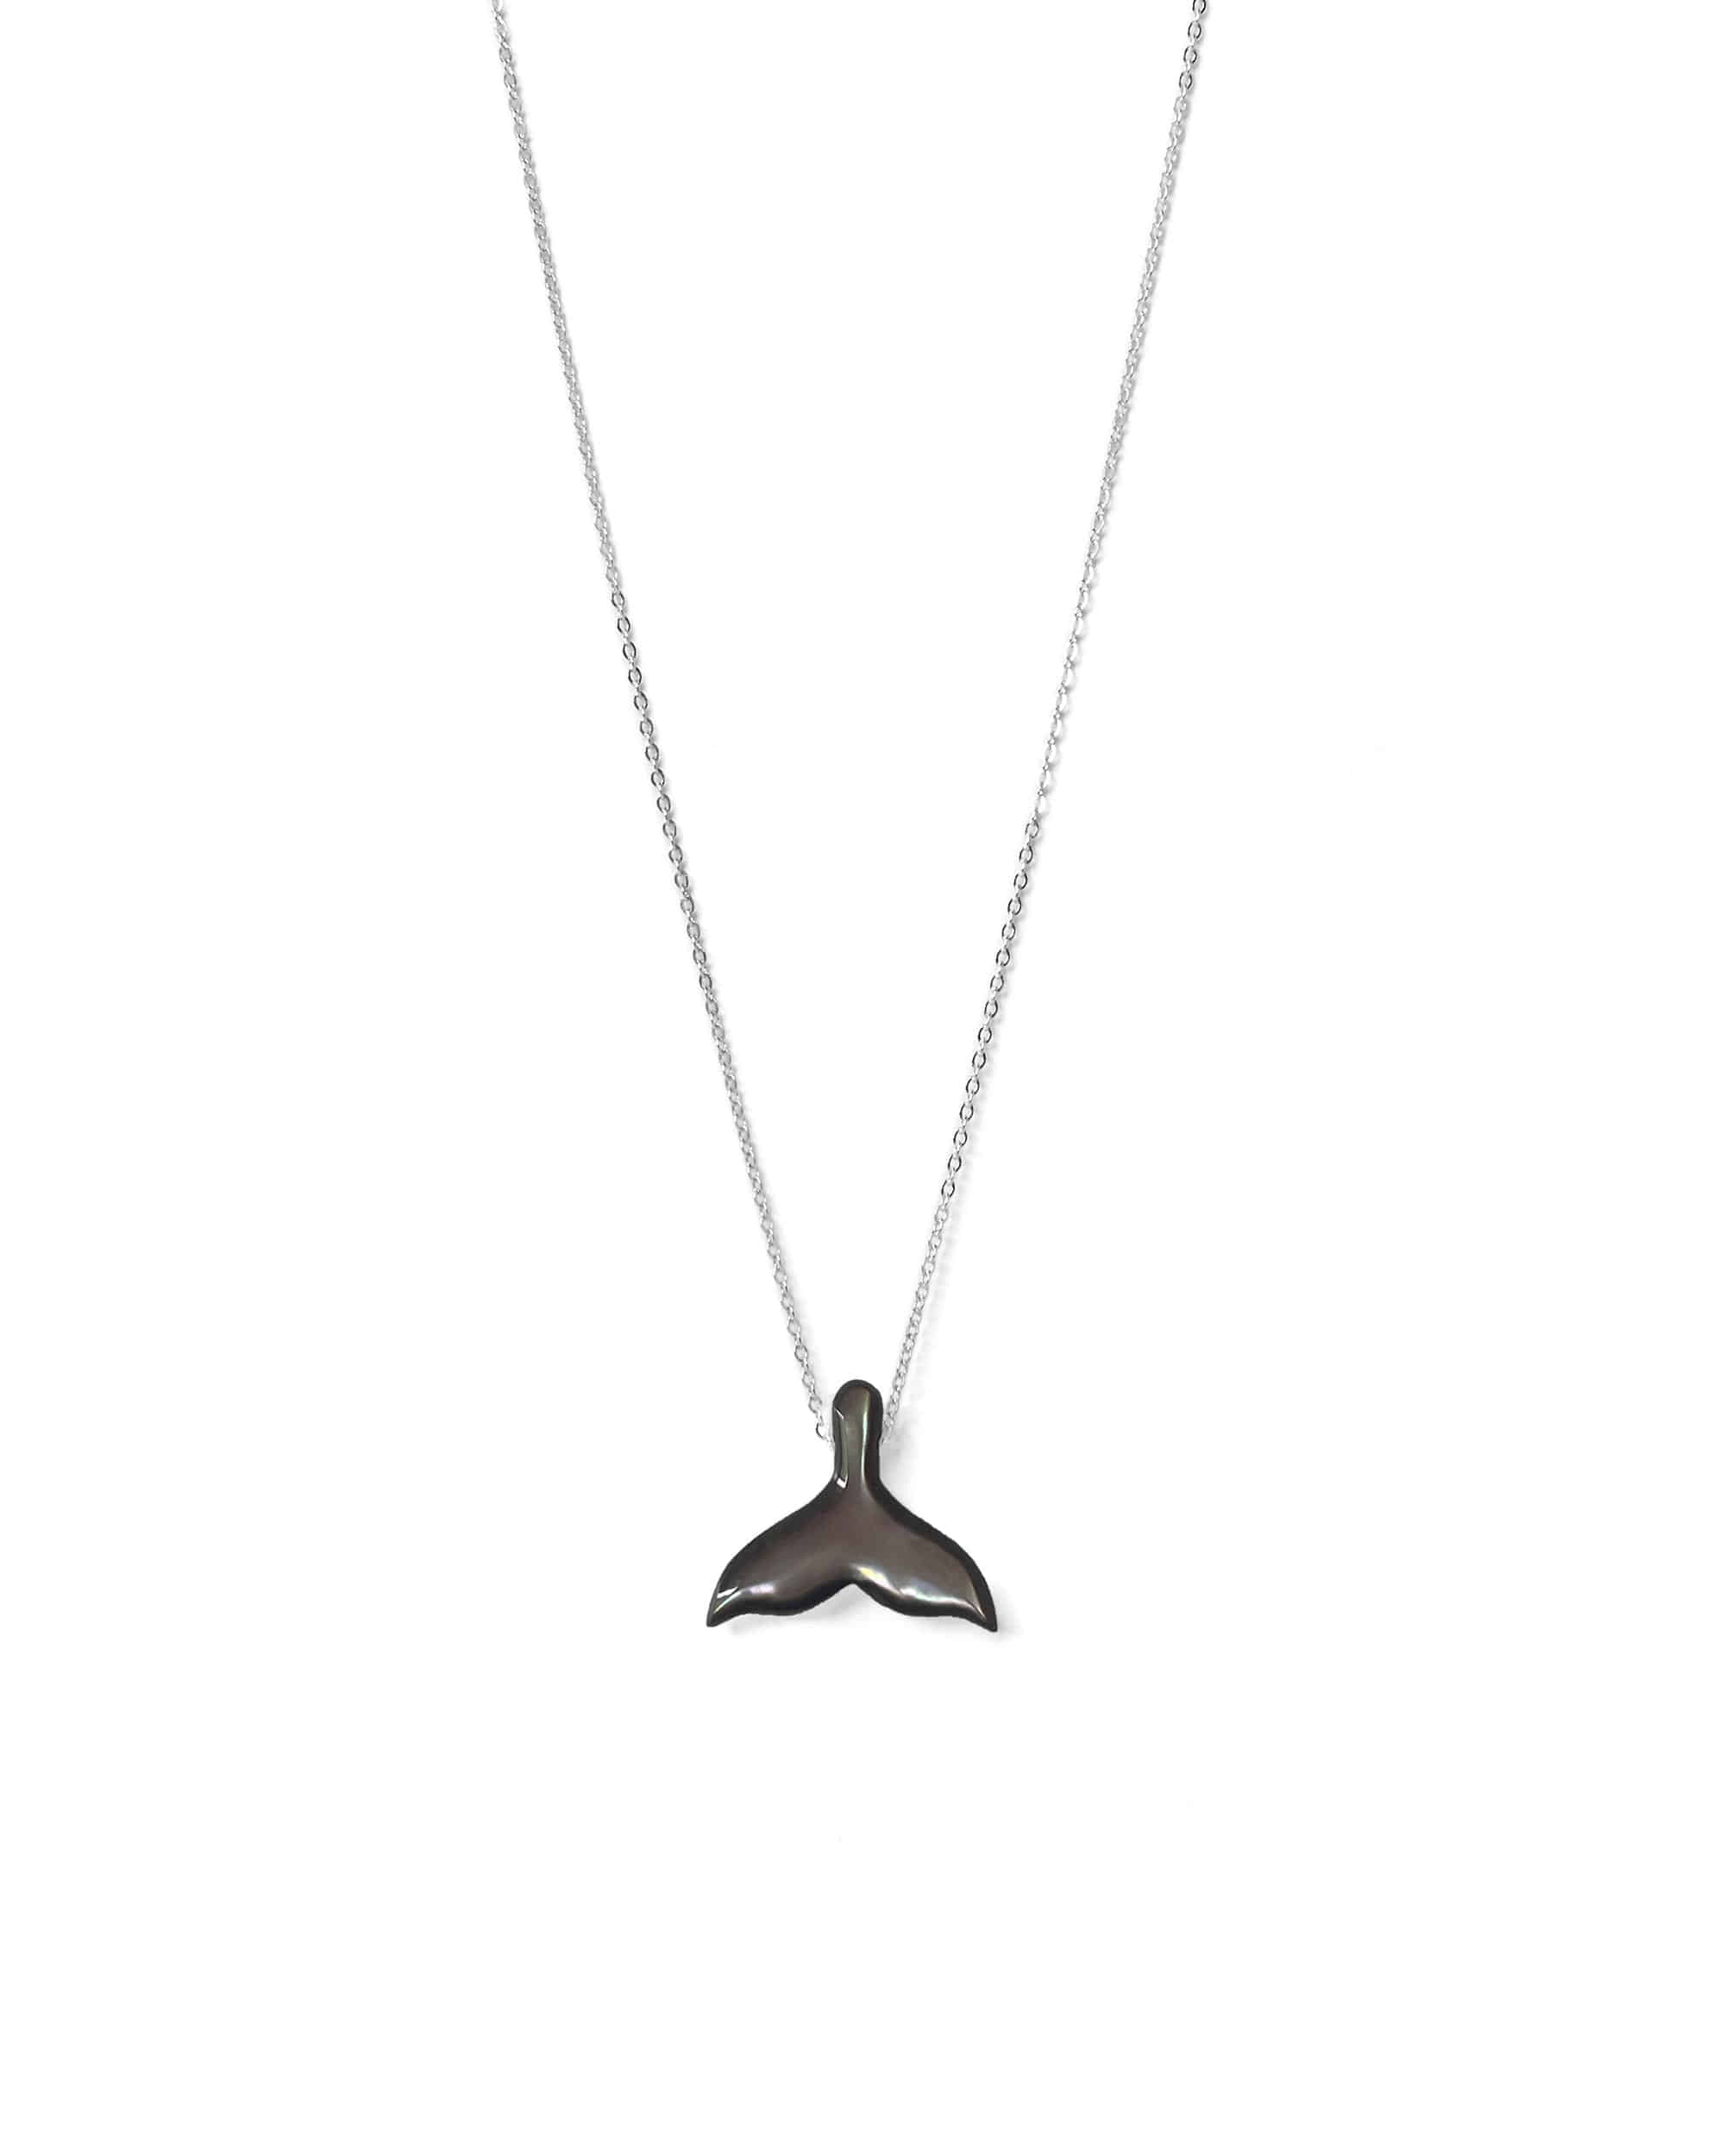 Dolphin Tail Black mother-of-pearl Silver Necklace